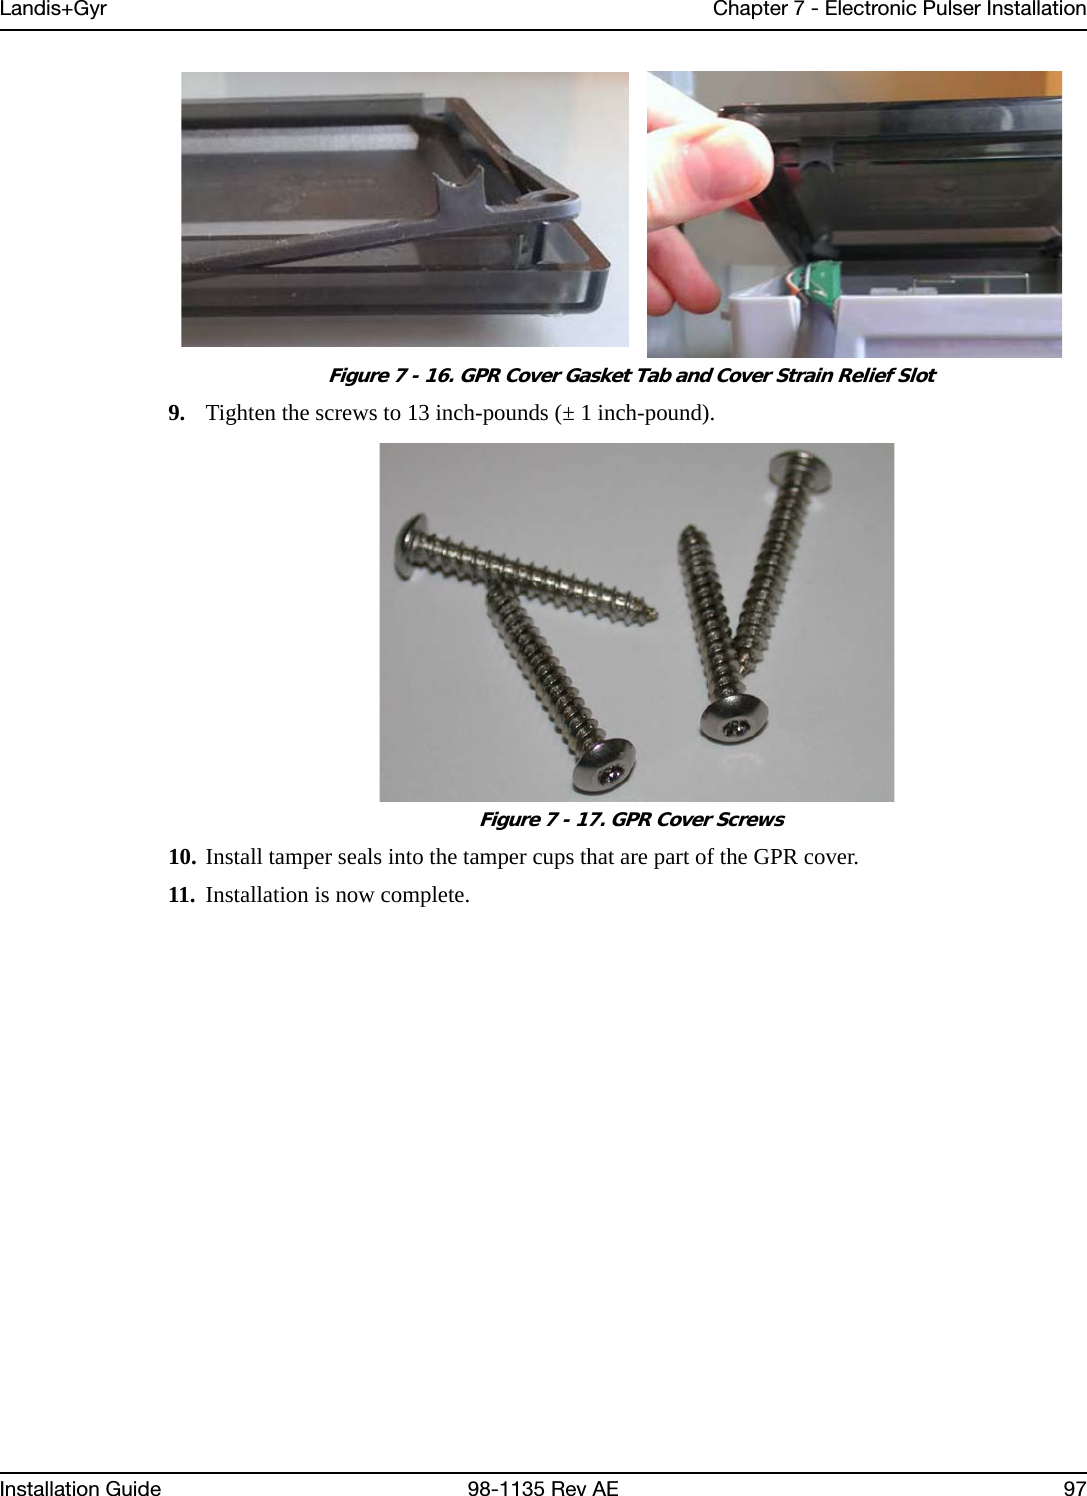 Landis+Gyr Chapter 7 - Electronic Pulser InstallationInstallation Guide 98-1135 Rev AE 97 Figure 7 - 16. GPR Cover Gasket Tab and Cover Strain Relief Slot9. Tighten the screws to 13 inch-pounds (± 1 inch-pound). Figure 7 - 17. GPR Cover Screws10. Install tamper seals into the tamper cups that are part of the GPR cover.11. Installation is now complete.